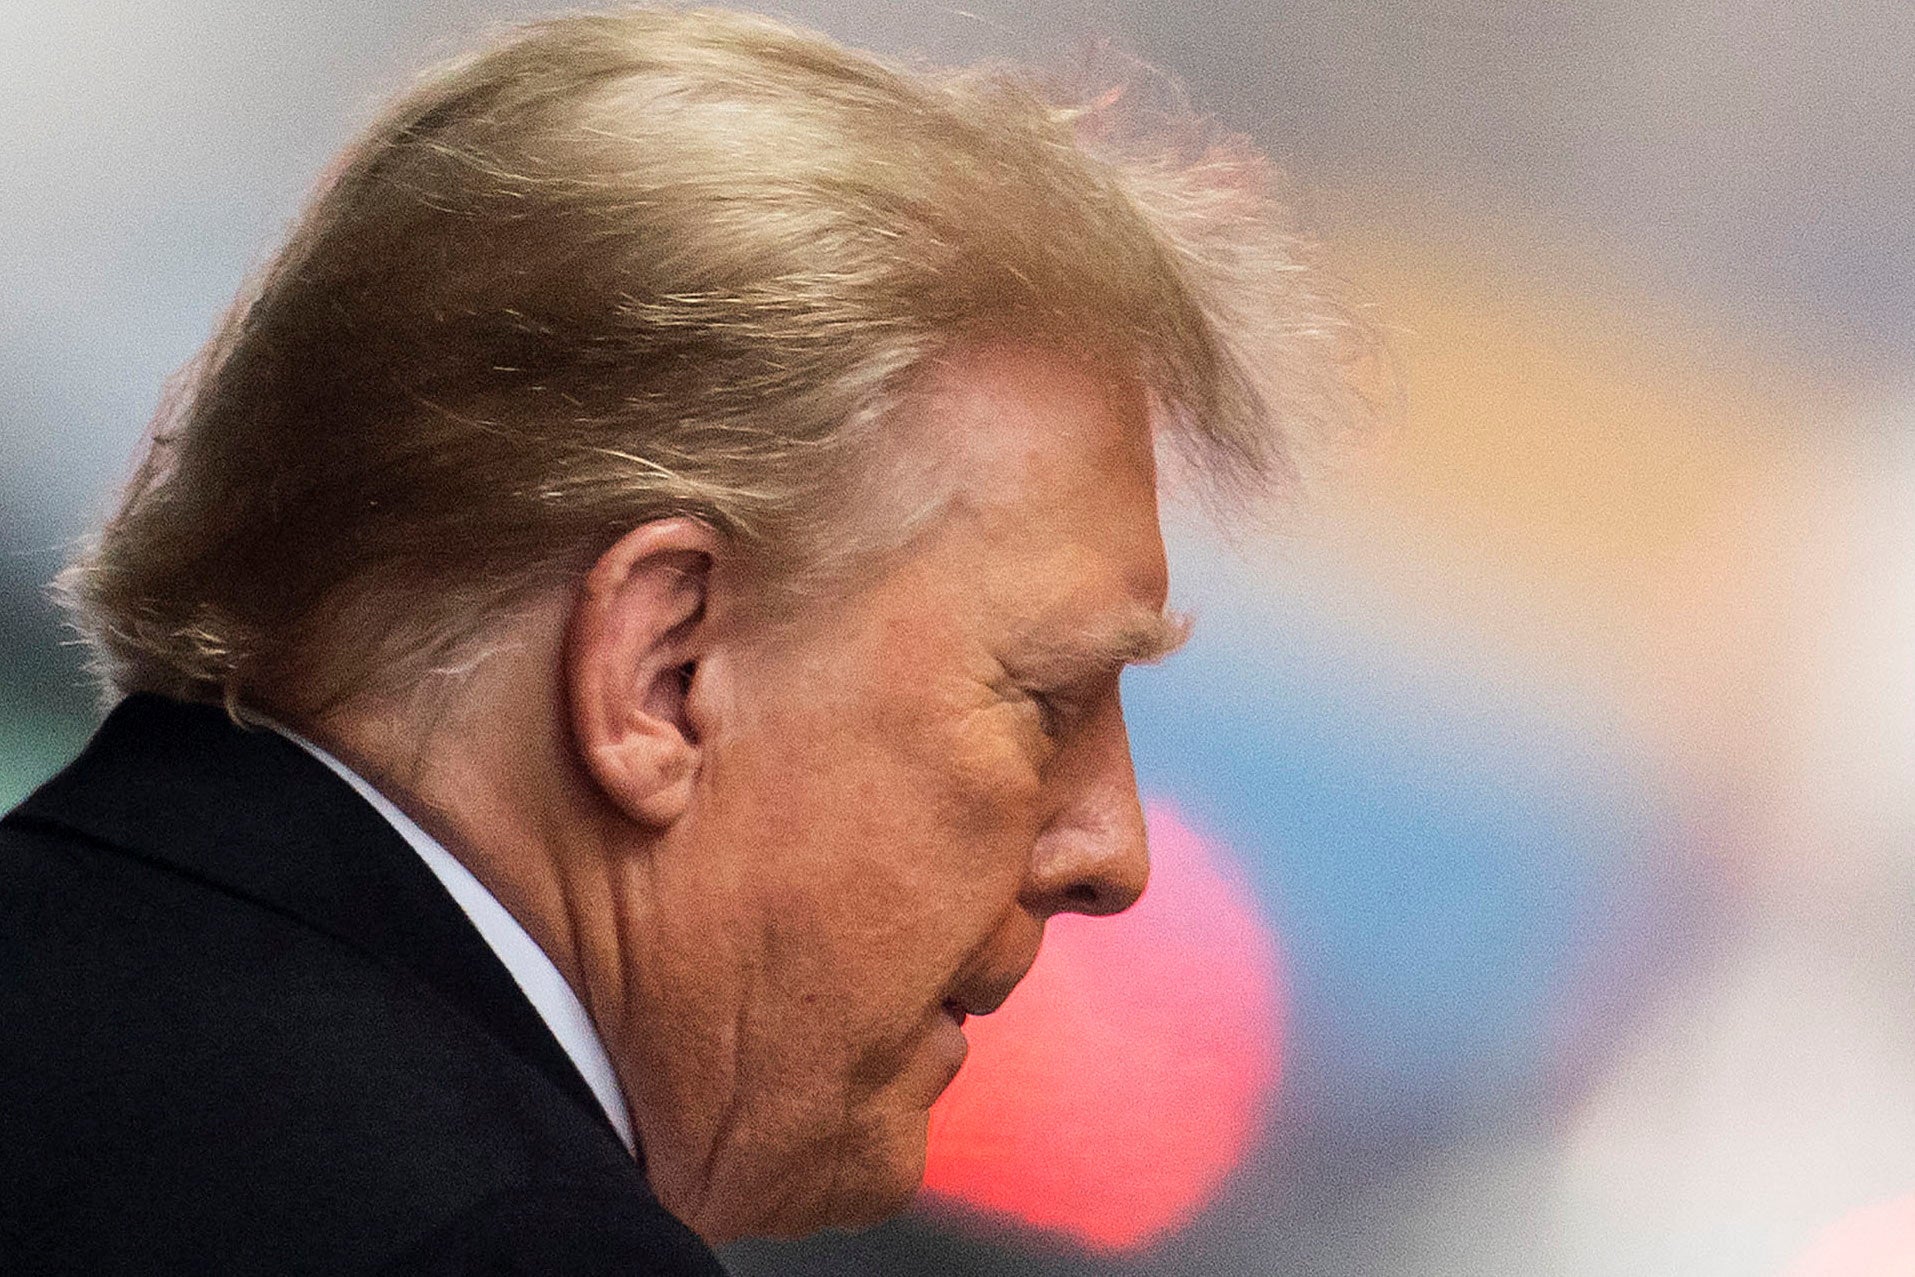 Donald Trump is pictured leaving a federal courthouse in Manhattan during a trial to determine damages owed to E Jean Carroll for his defamatary statements.